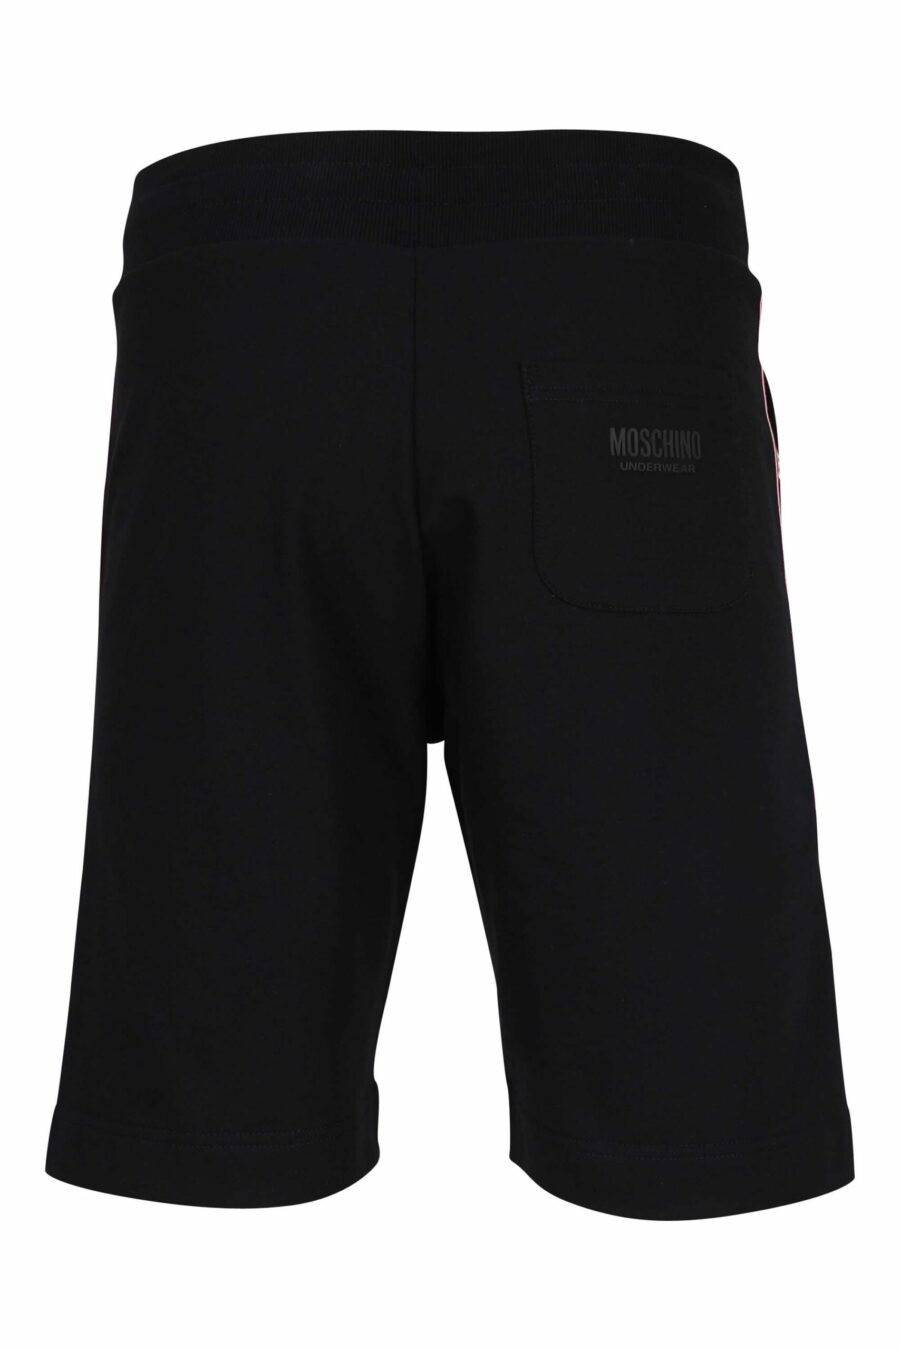 Tracksuit bottoms black with logo on vertical tape - 667113624945 2 scaled